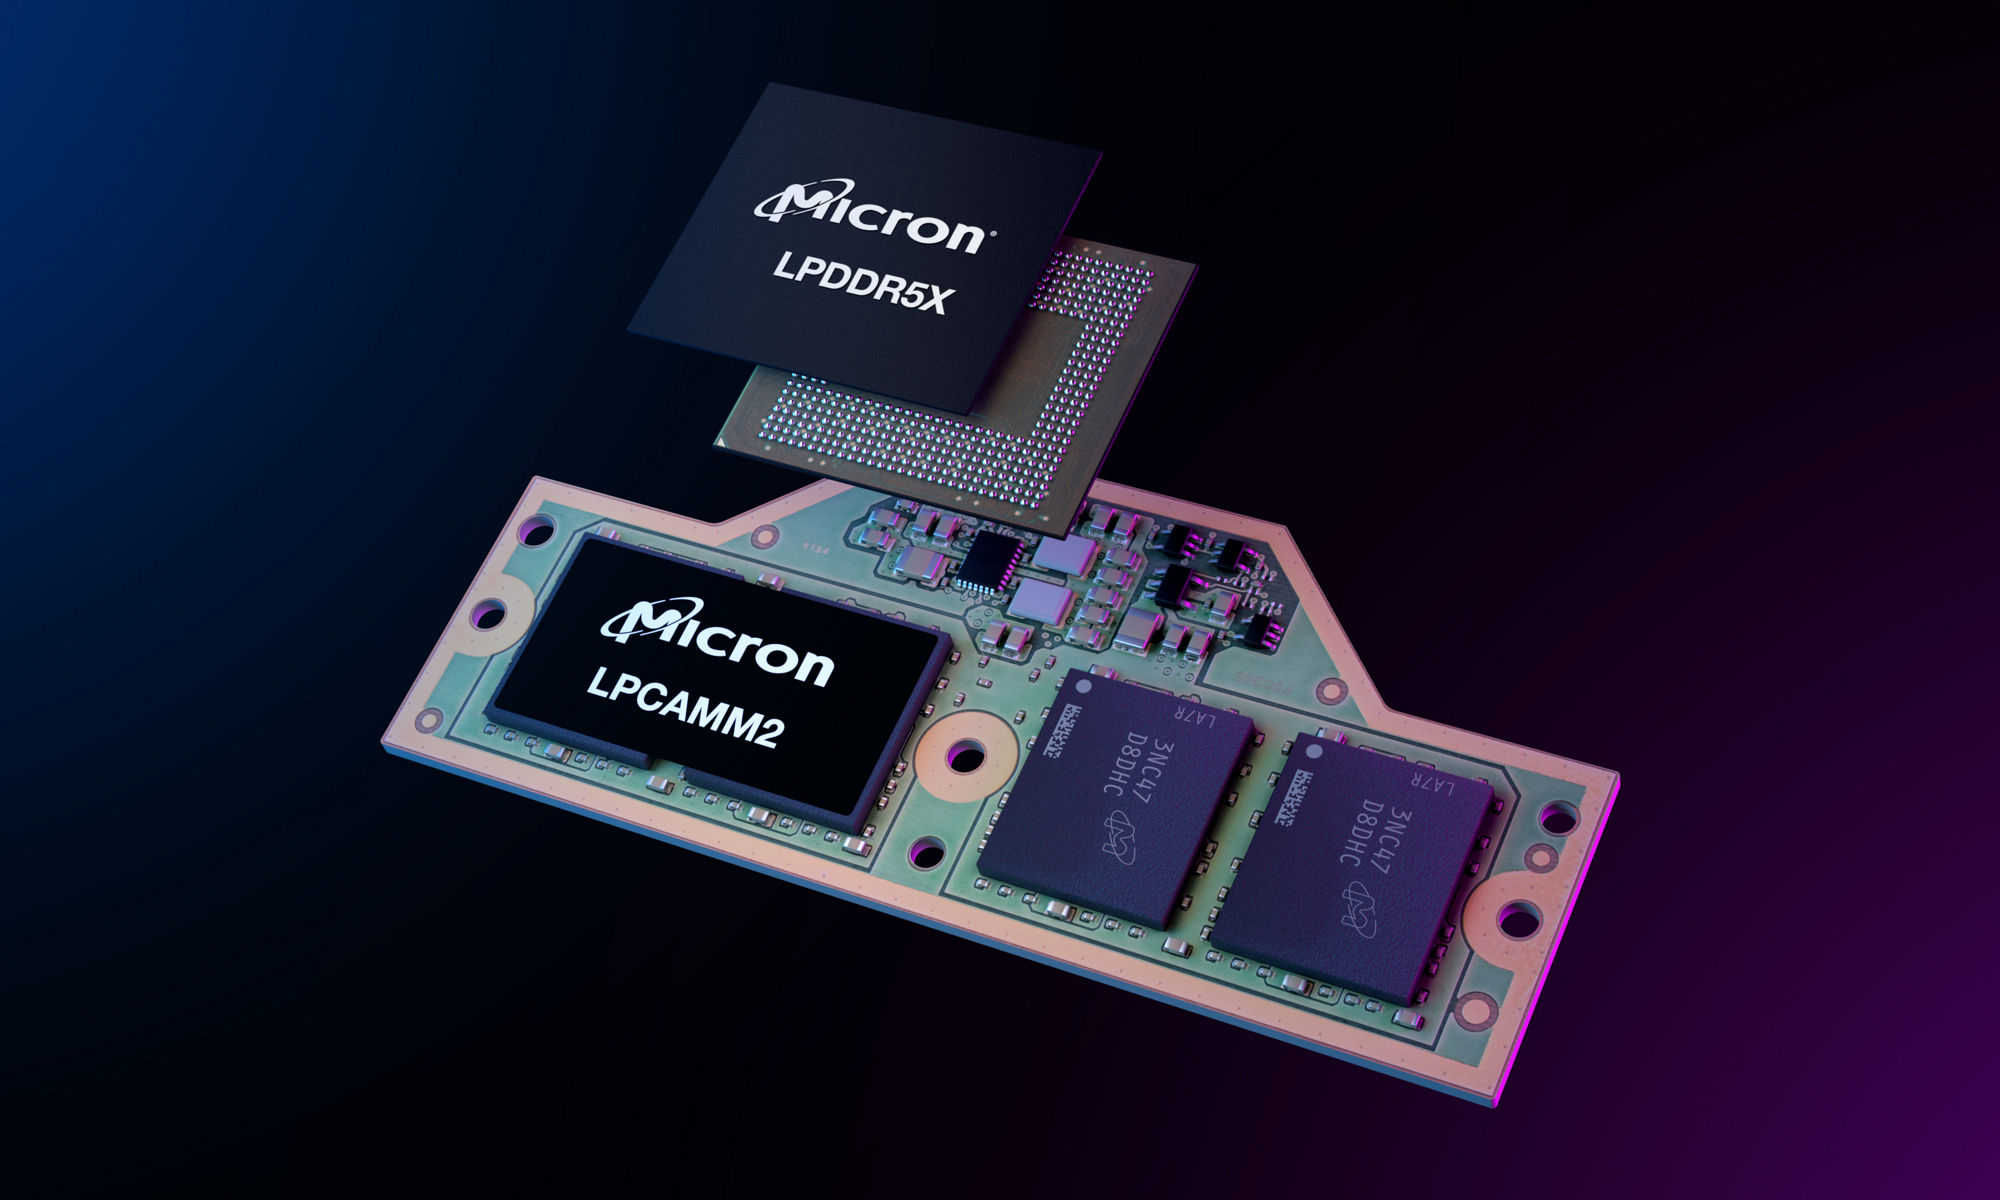 Micron LPDDR5X and LPCAMM2 devices